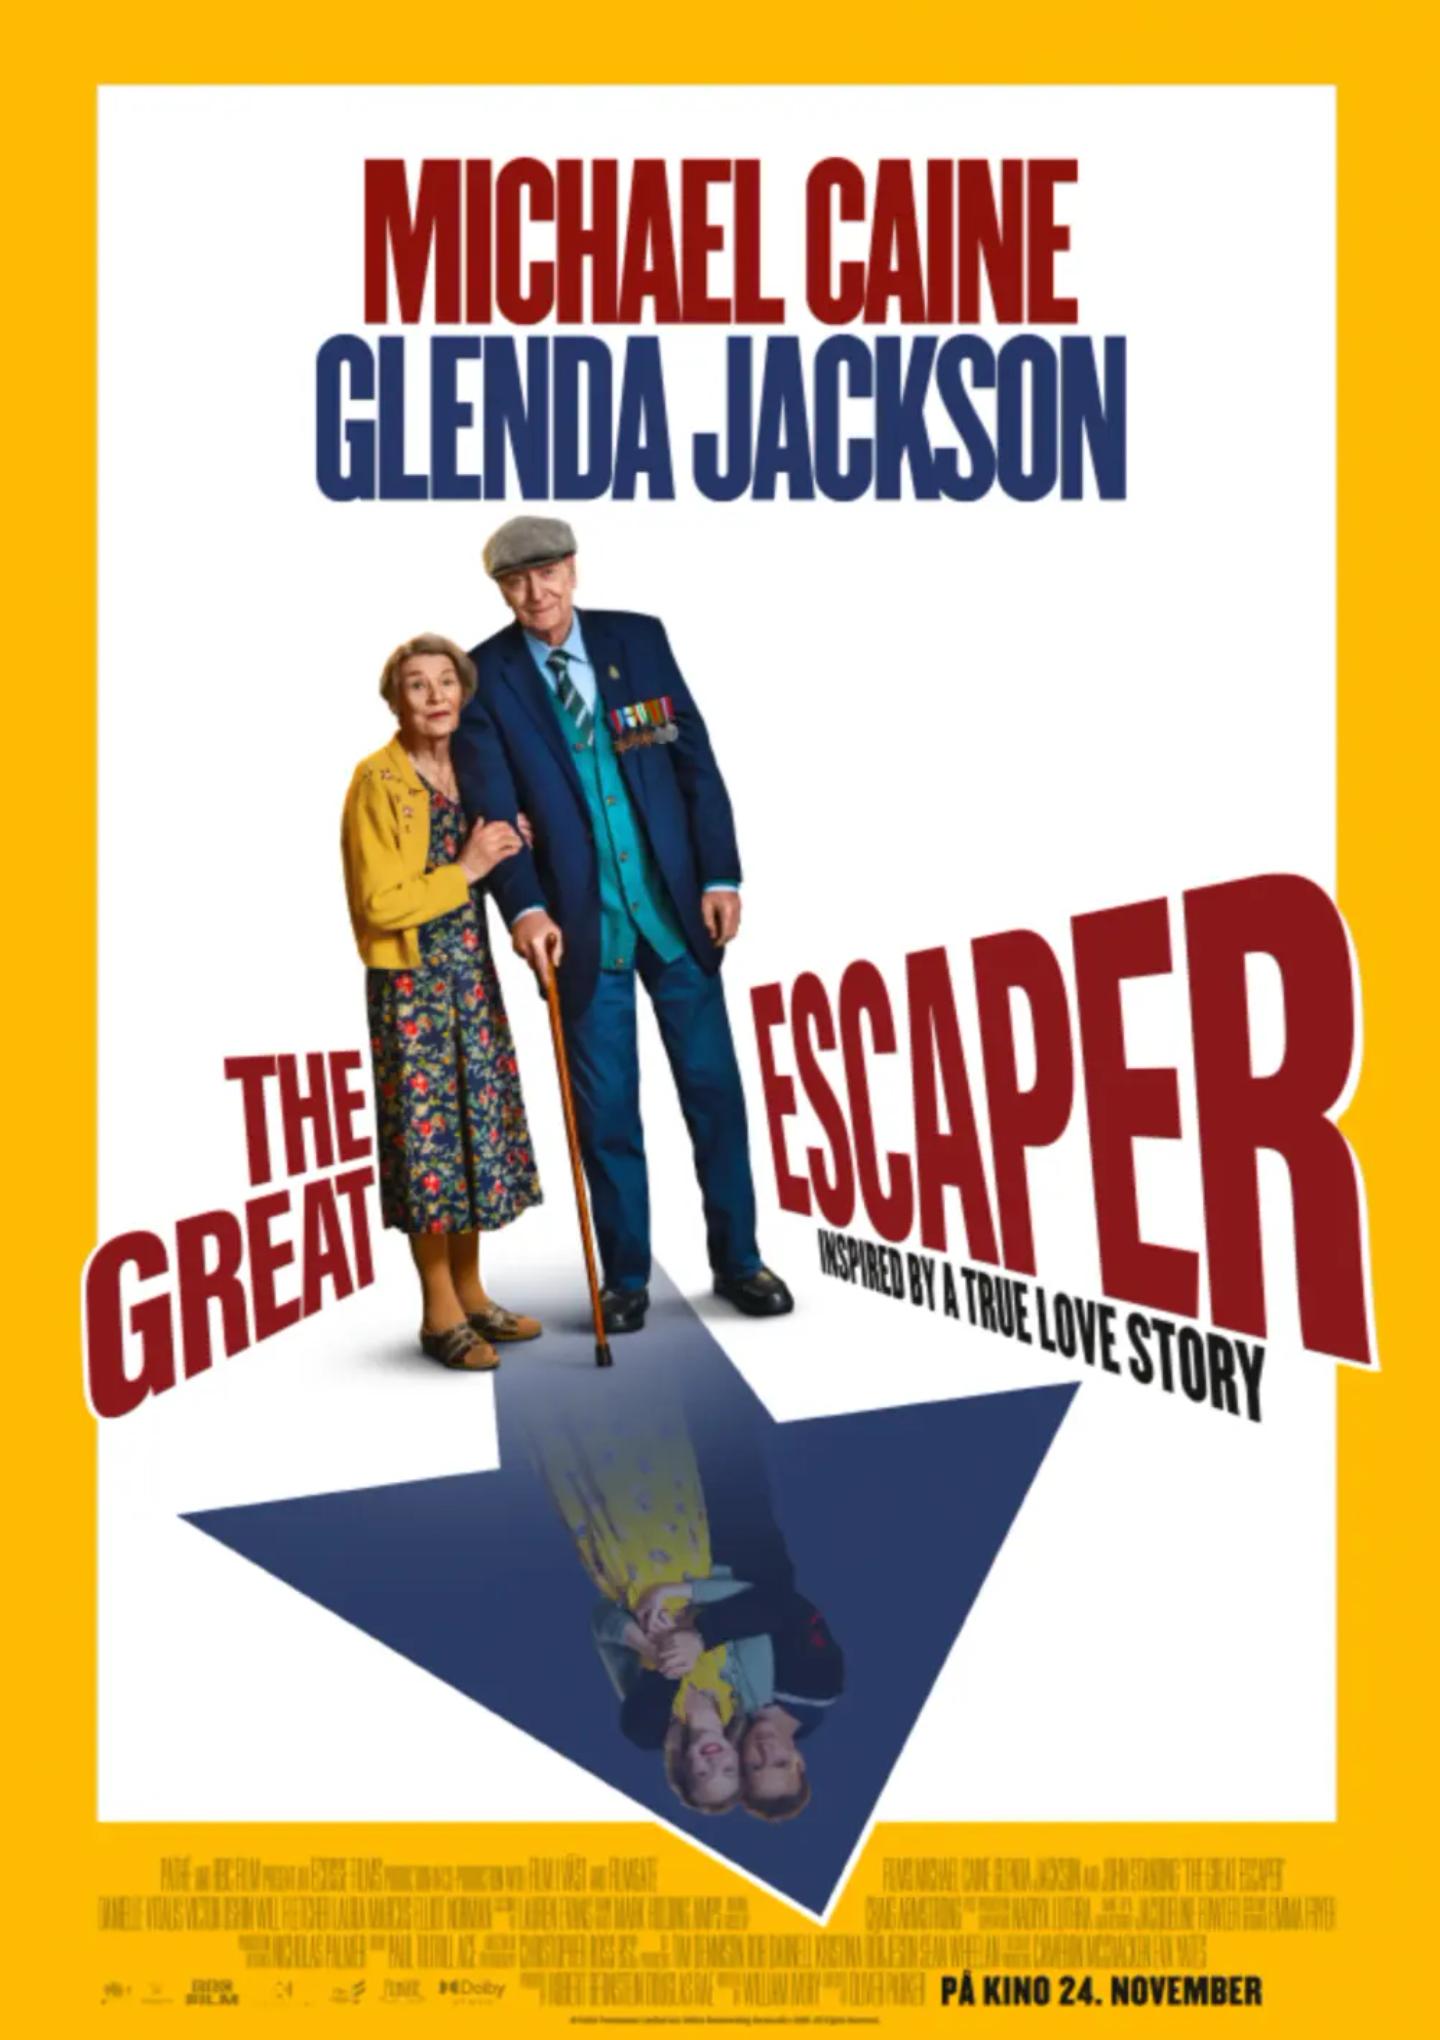 Plakat for 'The Great Escaper'